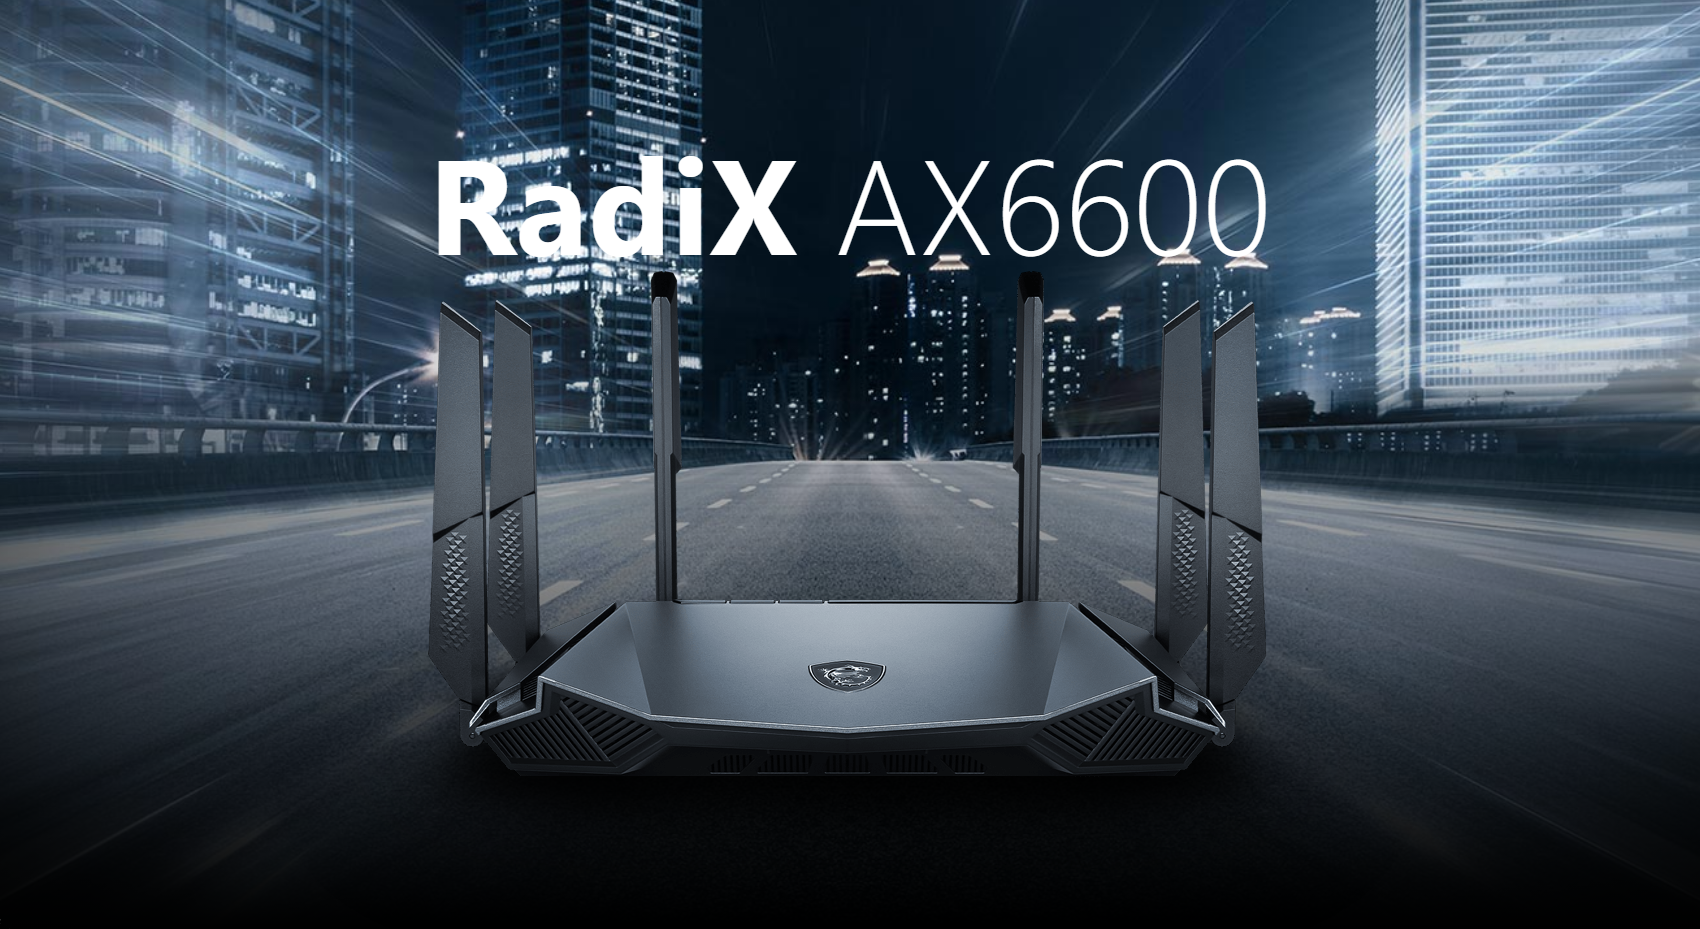 A large marketing image providing additional information about the product MSI RadiX AX6600 WiFi 6 Tri-Band Gaming Router - Additional alt info not provided